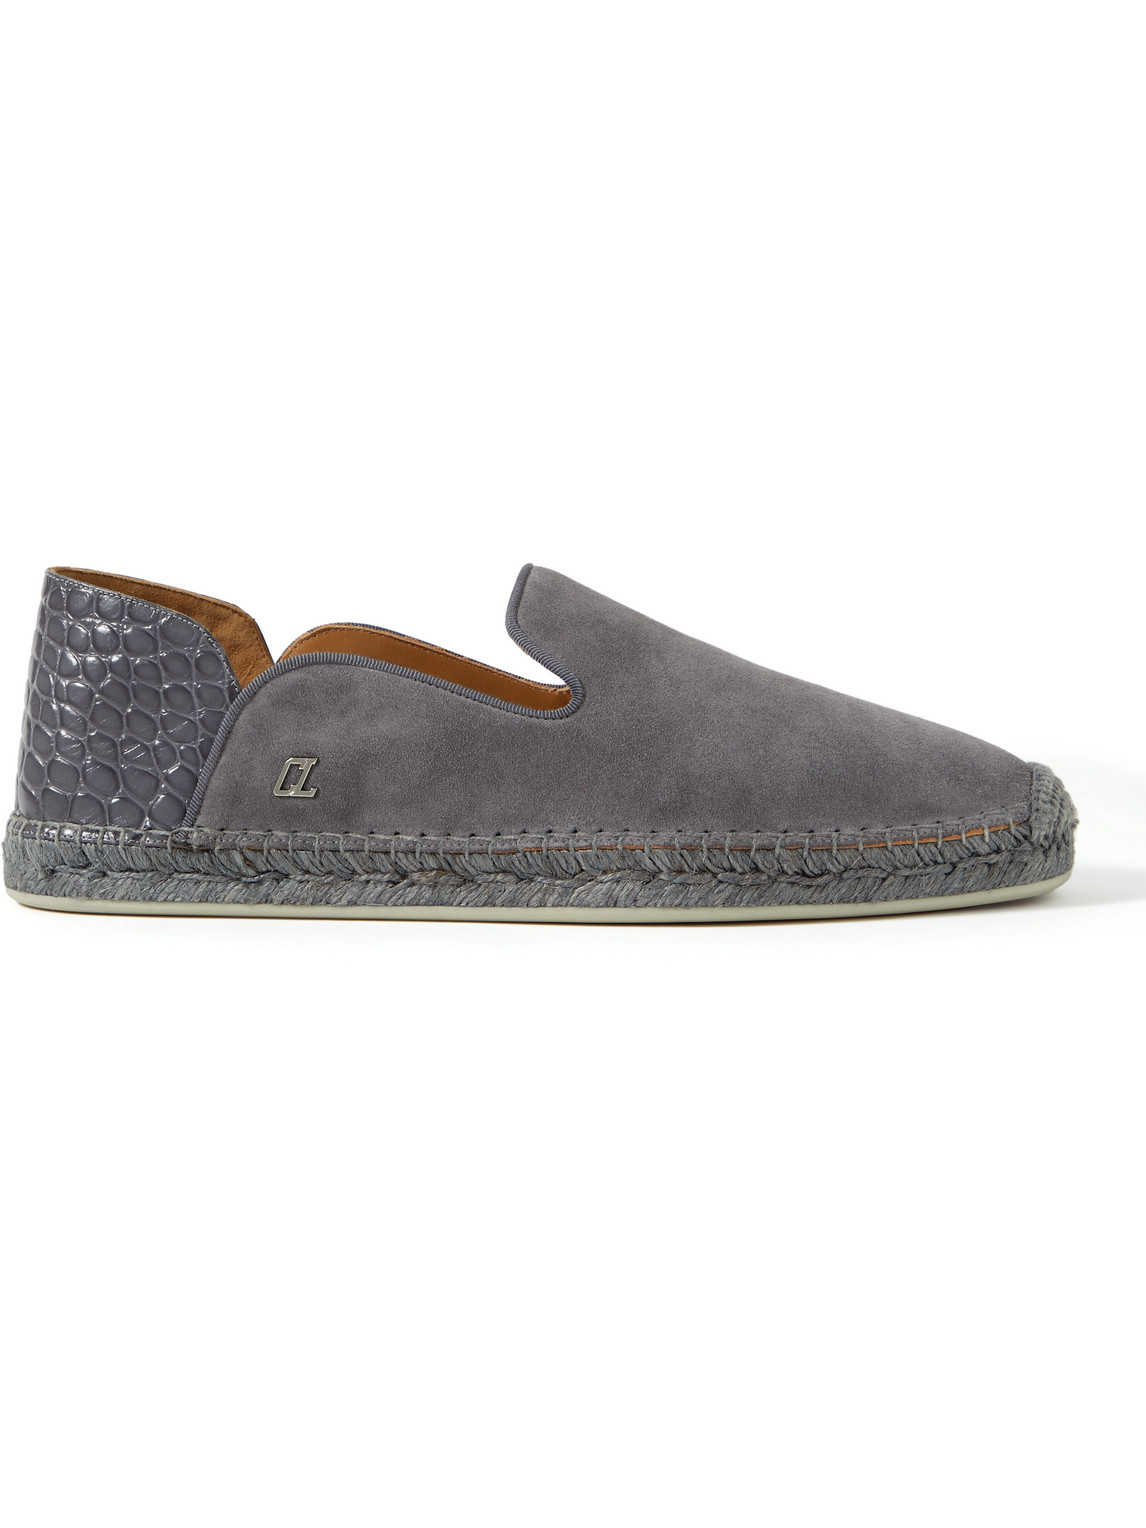 Christian Louboutin Collapsible-heel Croc-effect Leather-trimmed Suede Espadrilles In Grey